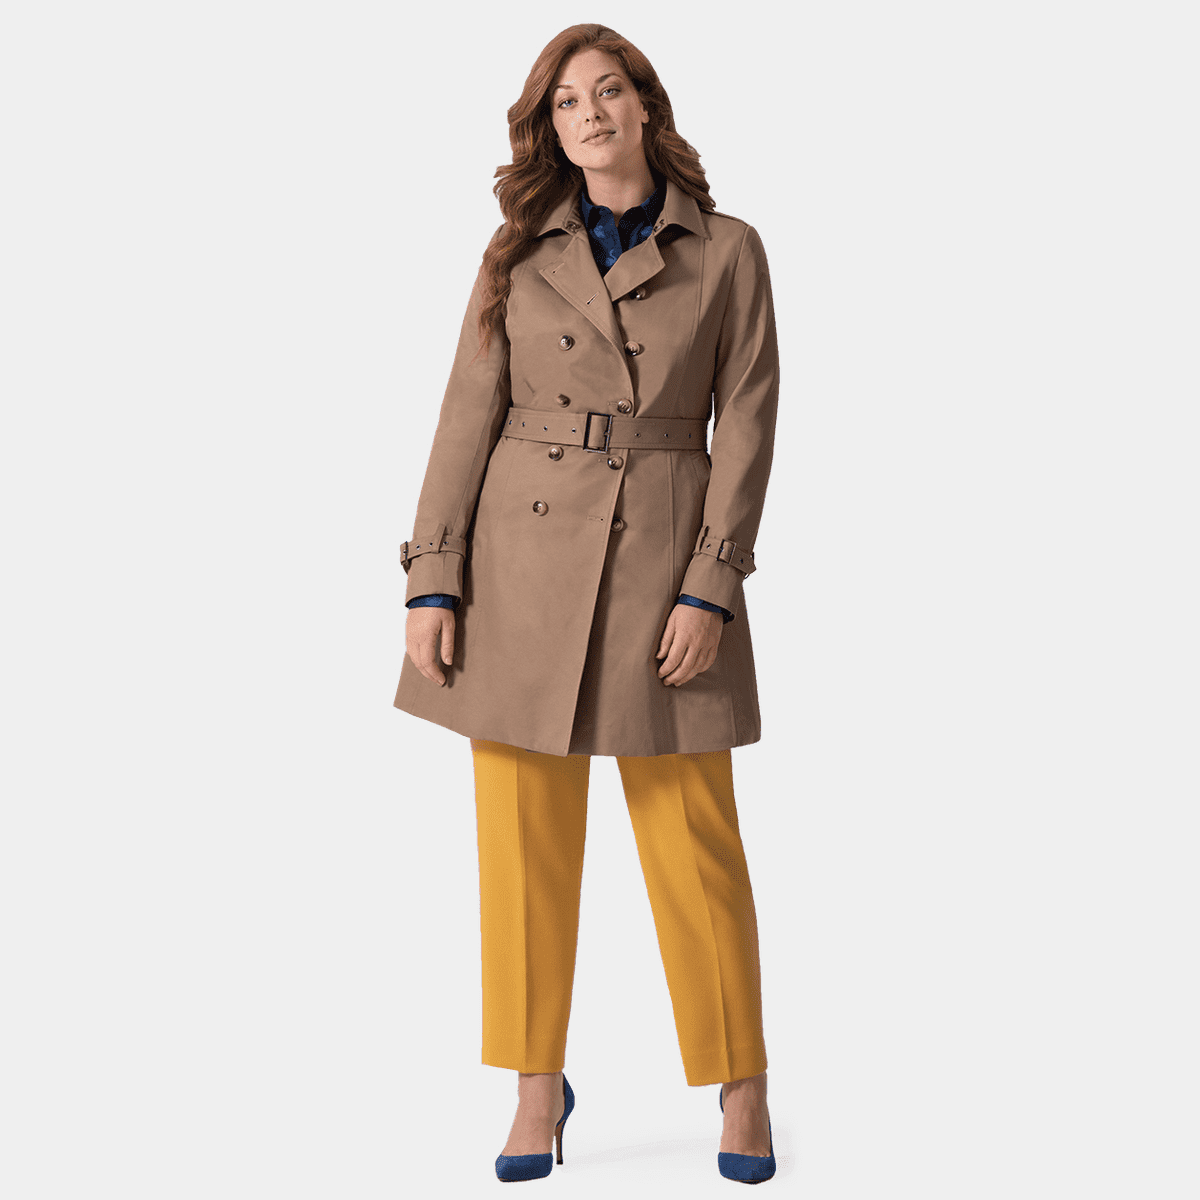 Plus Size Coats for Women Sumissura